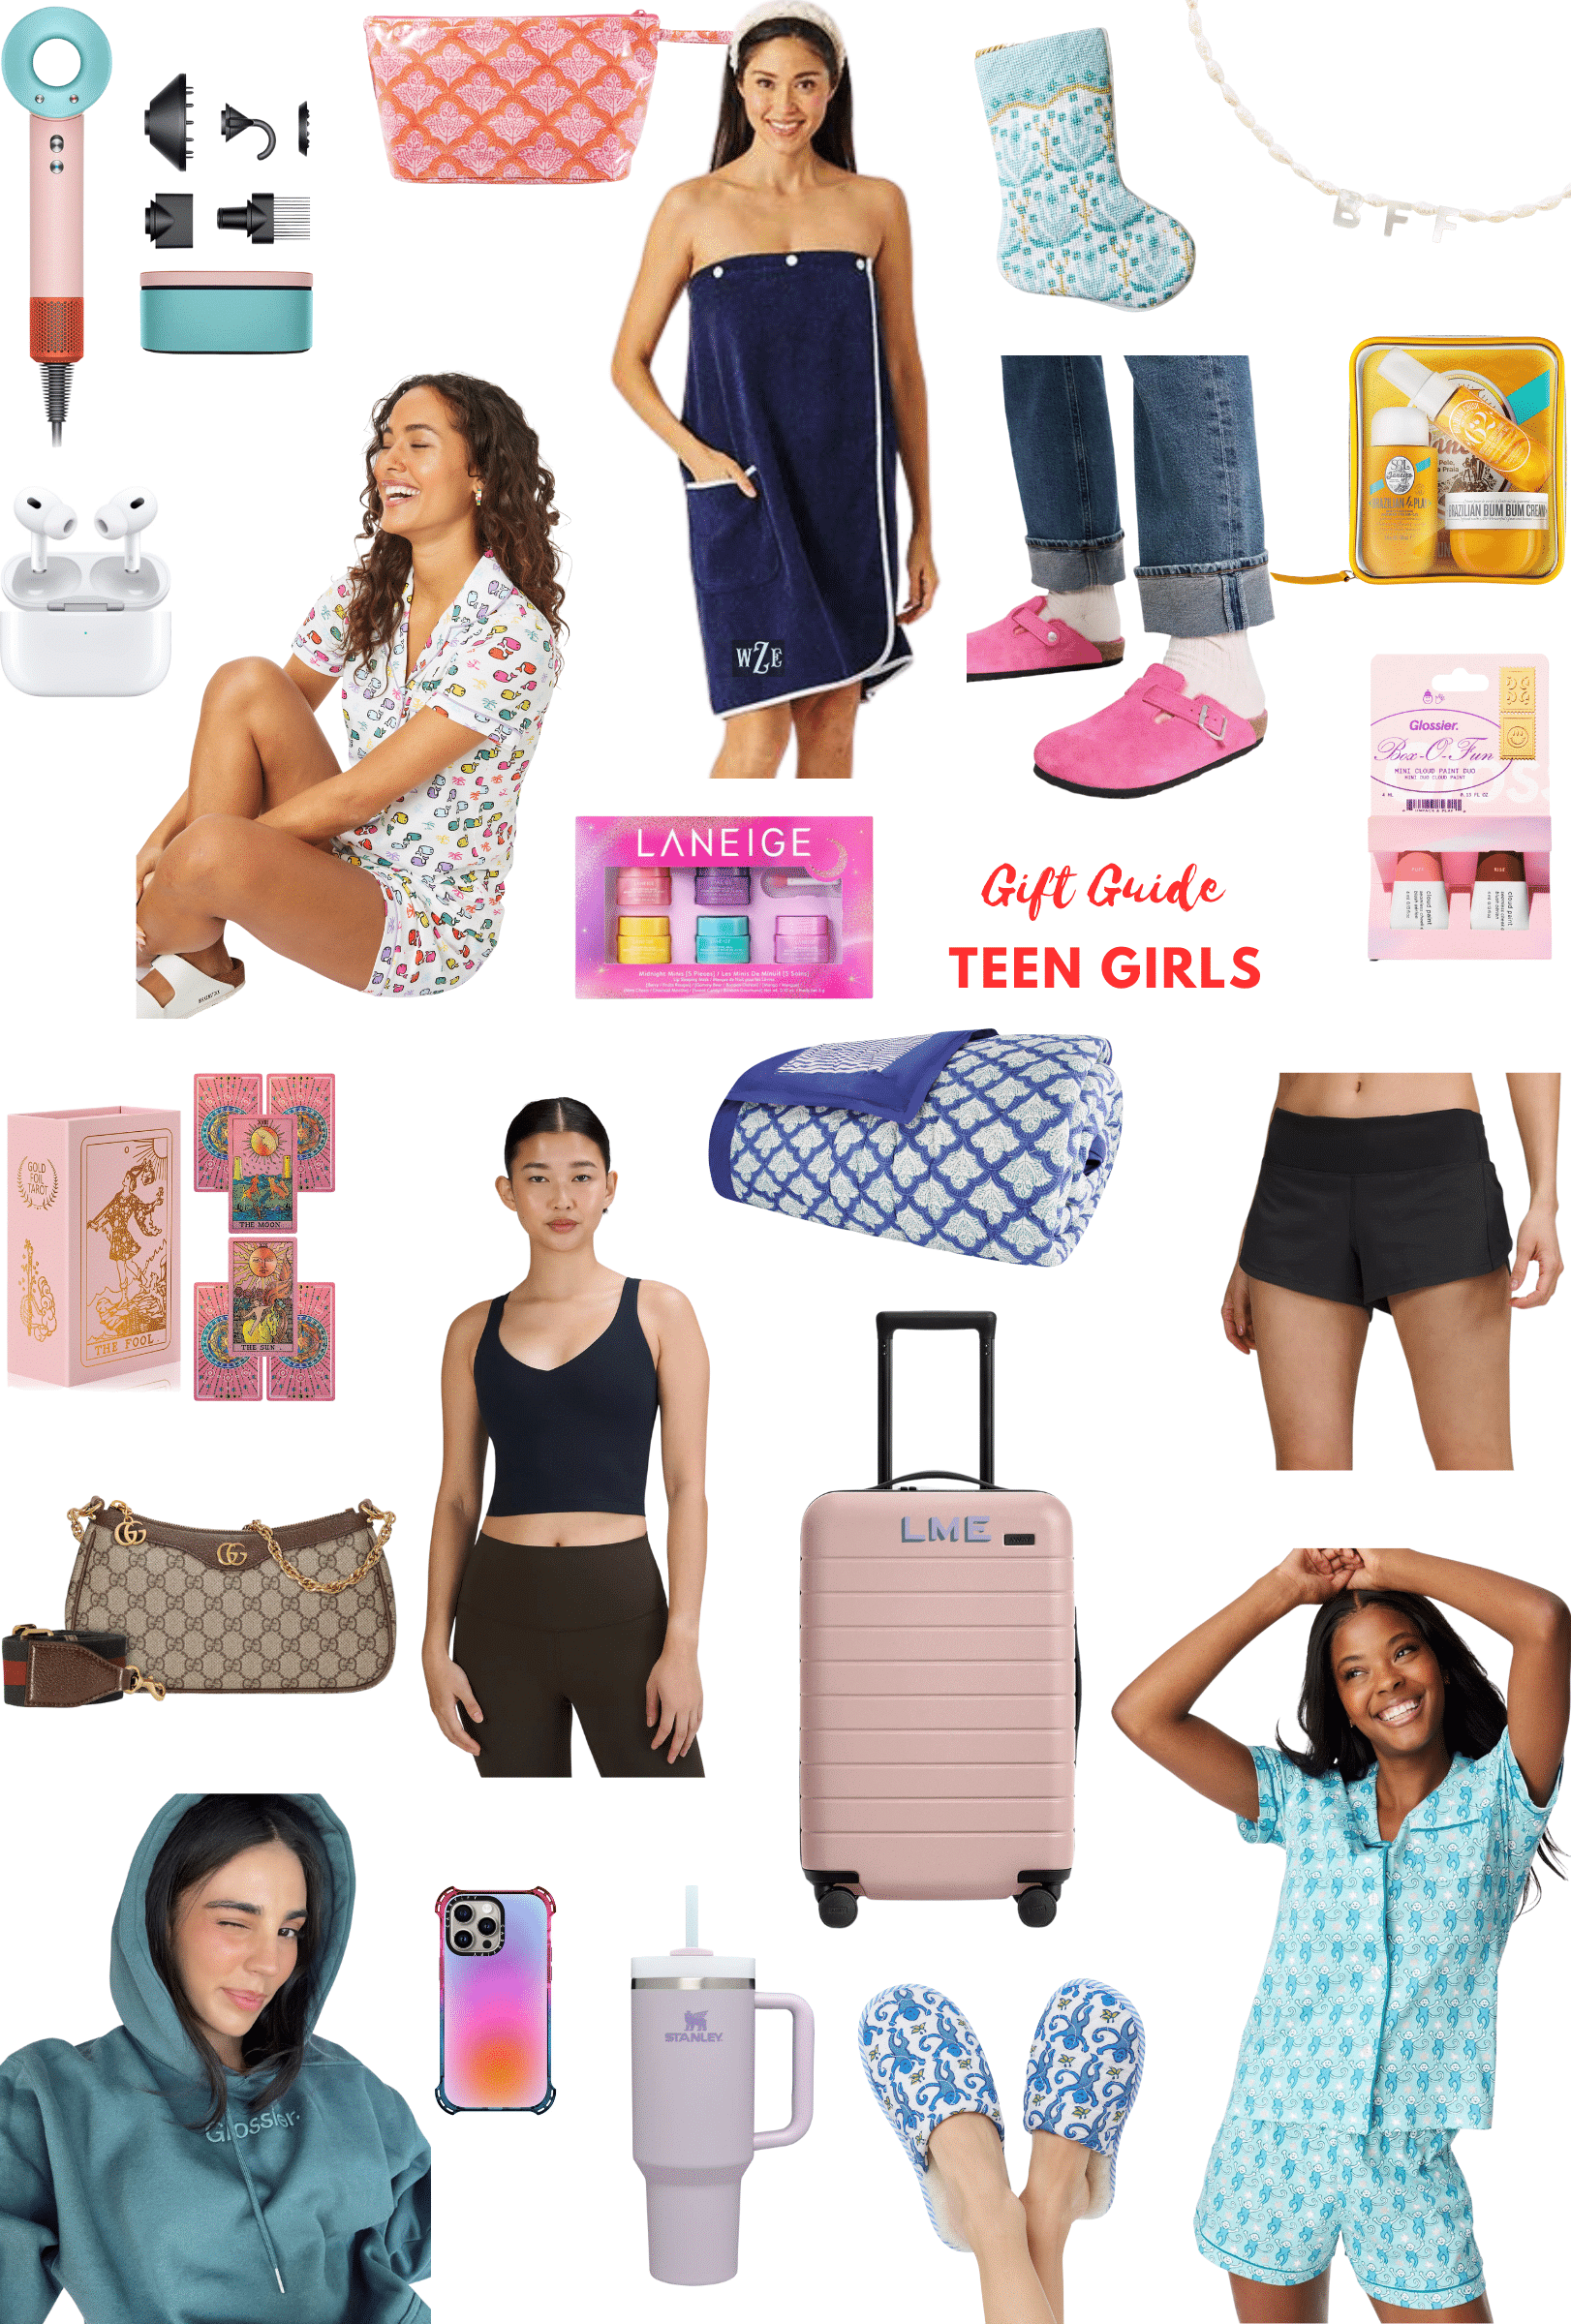 Holiday Gift Guide: Gift Ideas for Teens